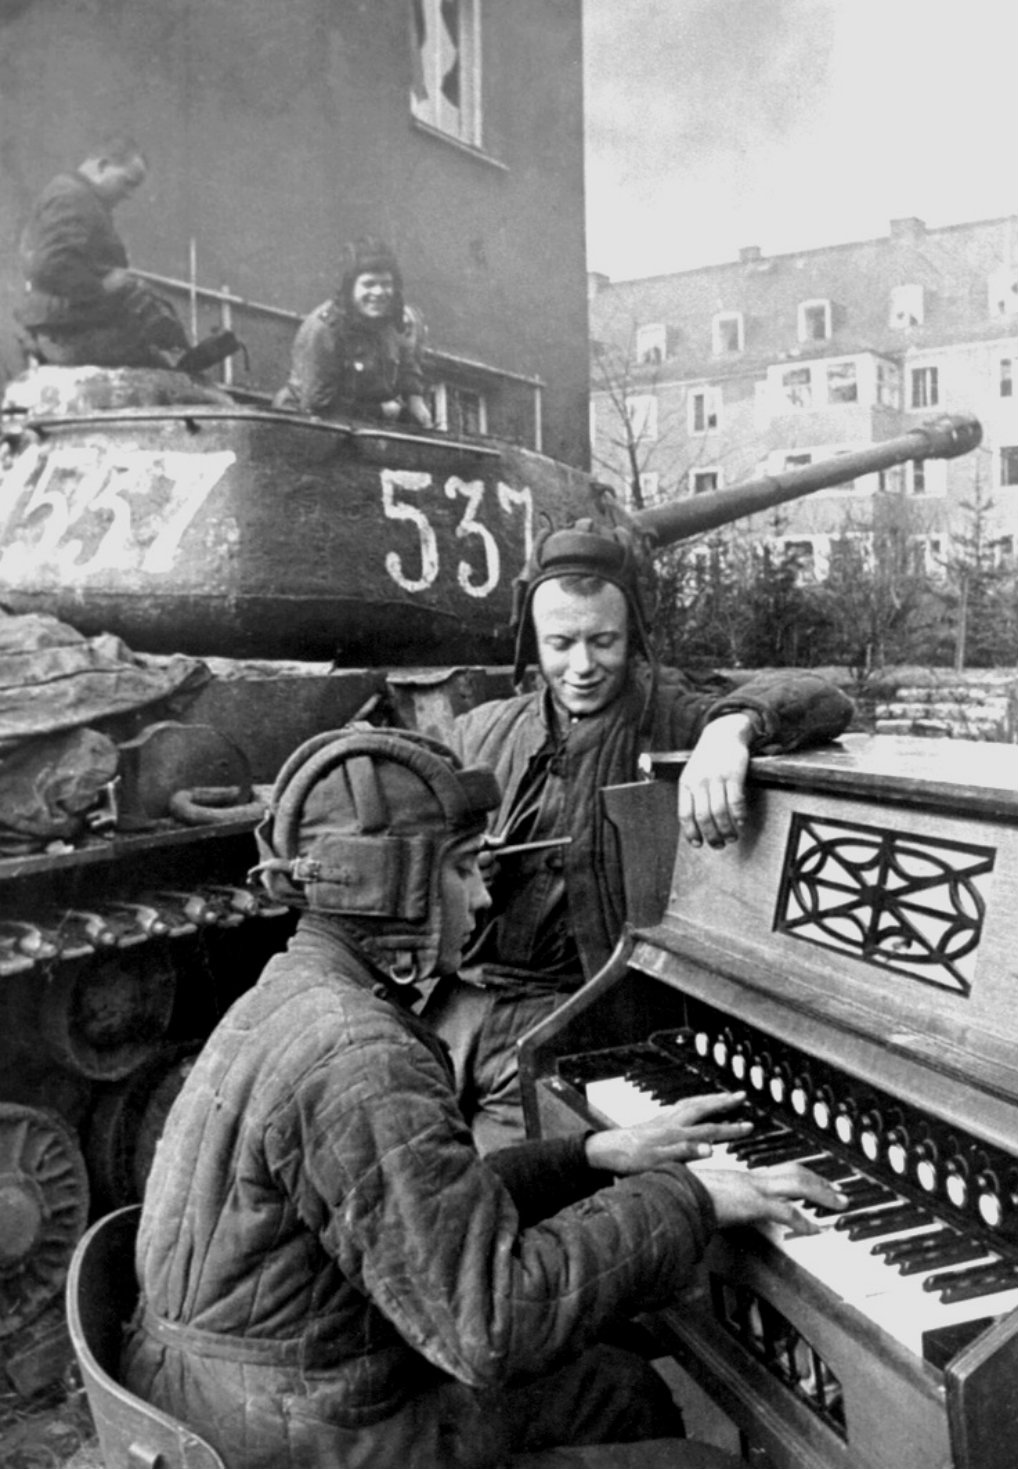 A Soviet tanker plays a piano during WWII.